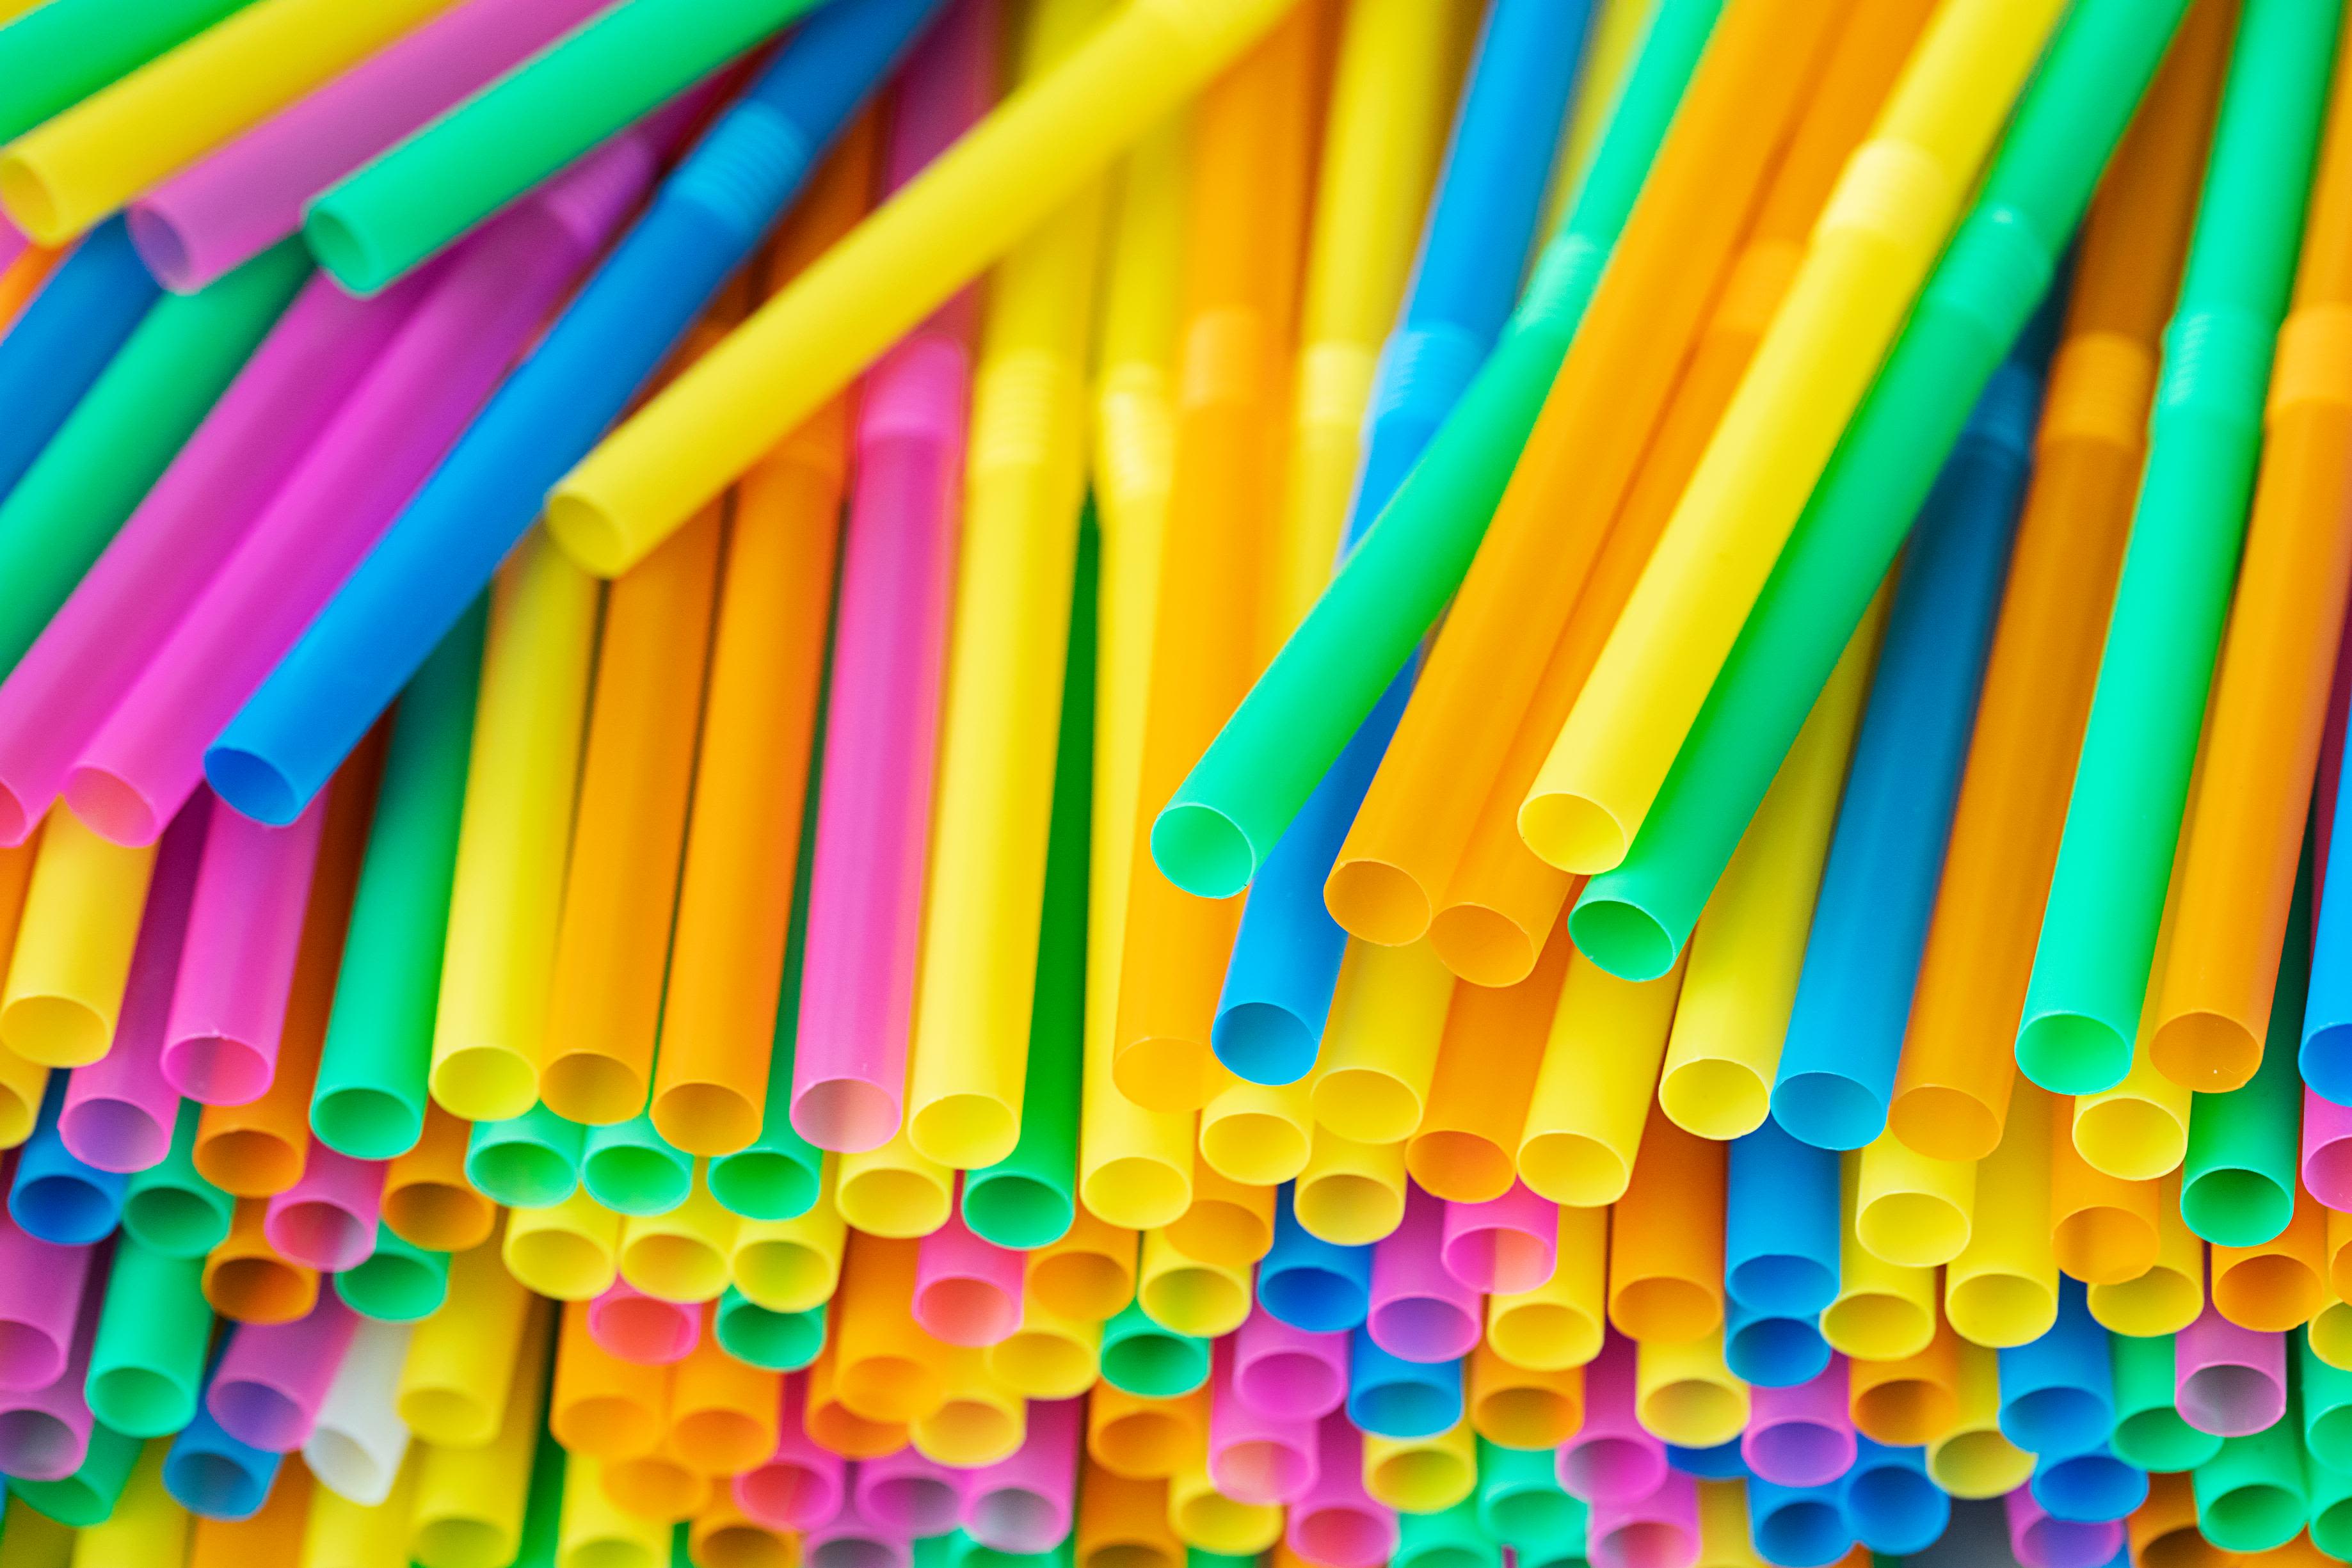 Disney is the latest company to do away with plastic straws